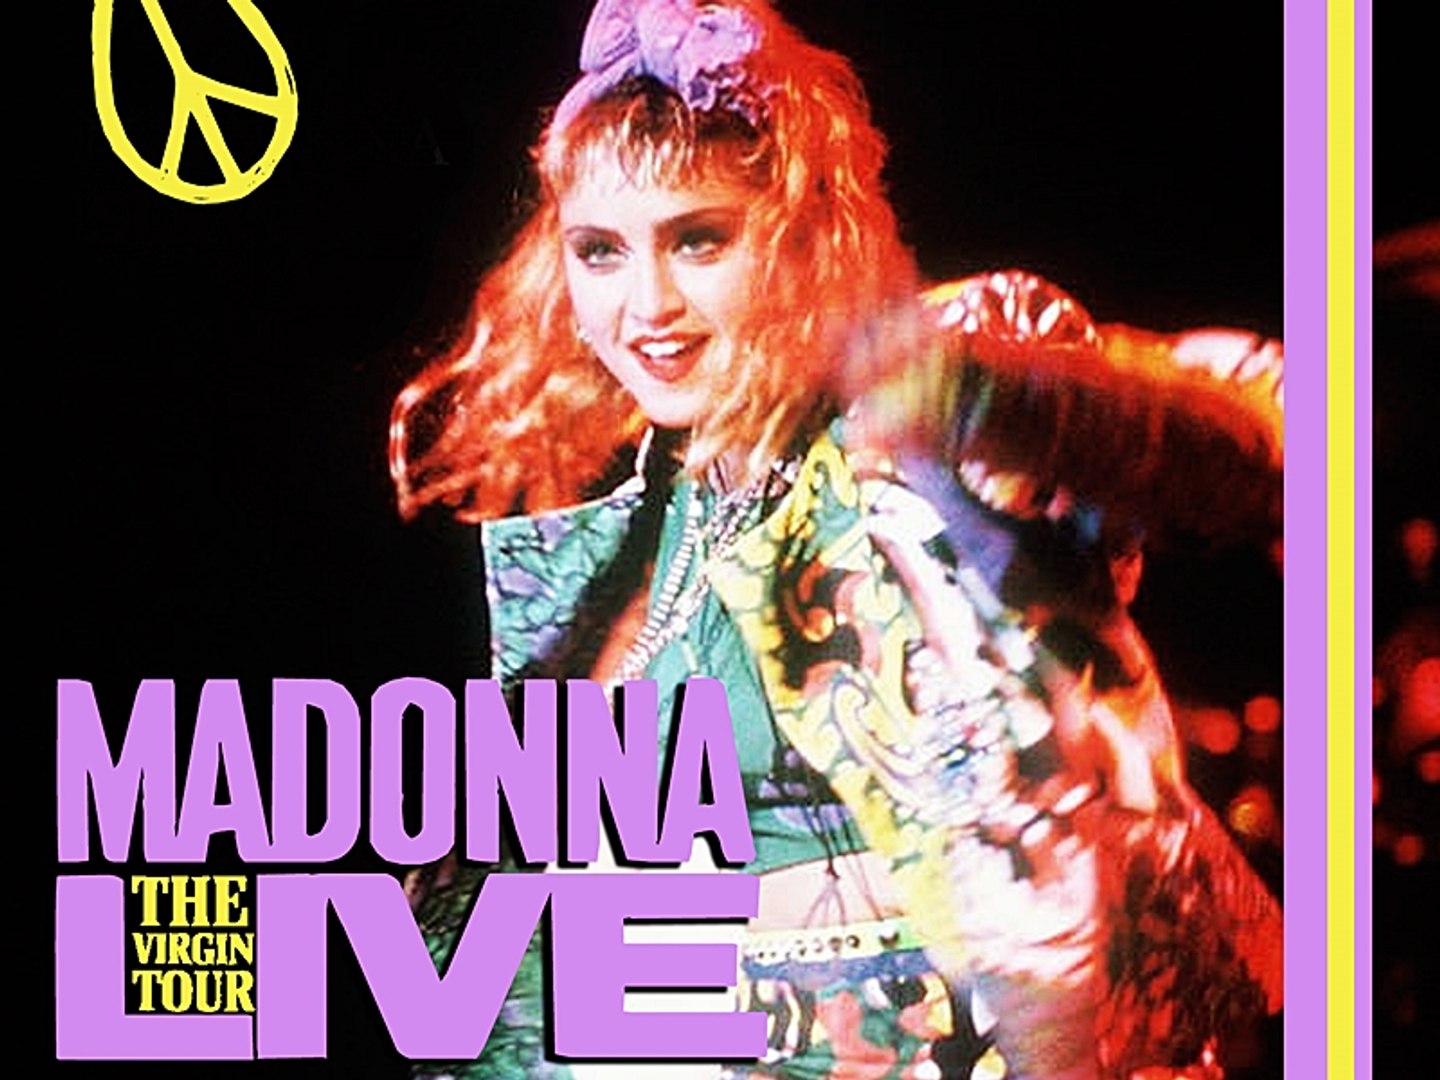 Madonna - The Virgin Tour (1985) - video Dailymotion